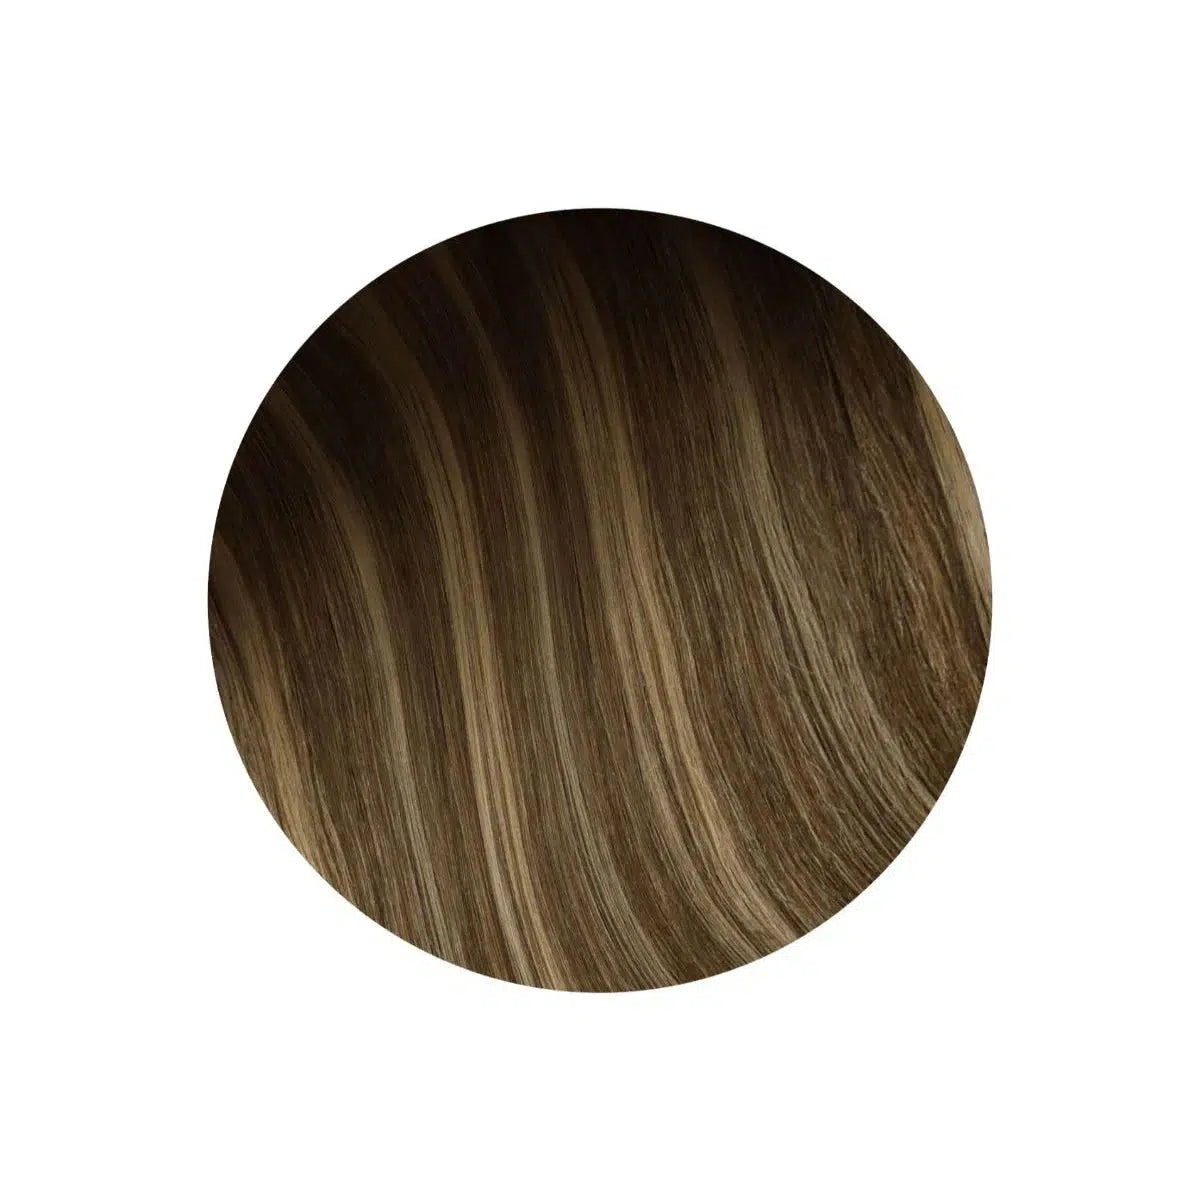 Glam Seamless Beach Wave Invisi Clip Rooted Caramelt Highlights - RH3/12